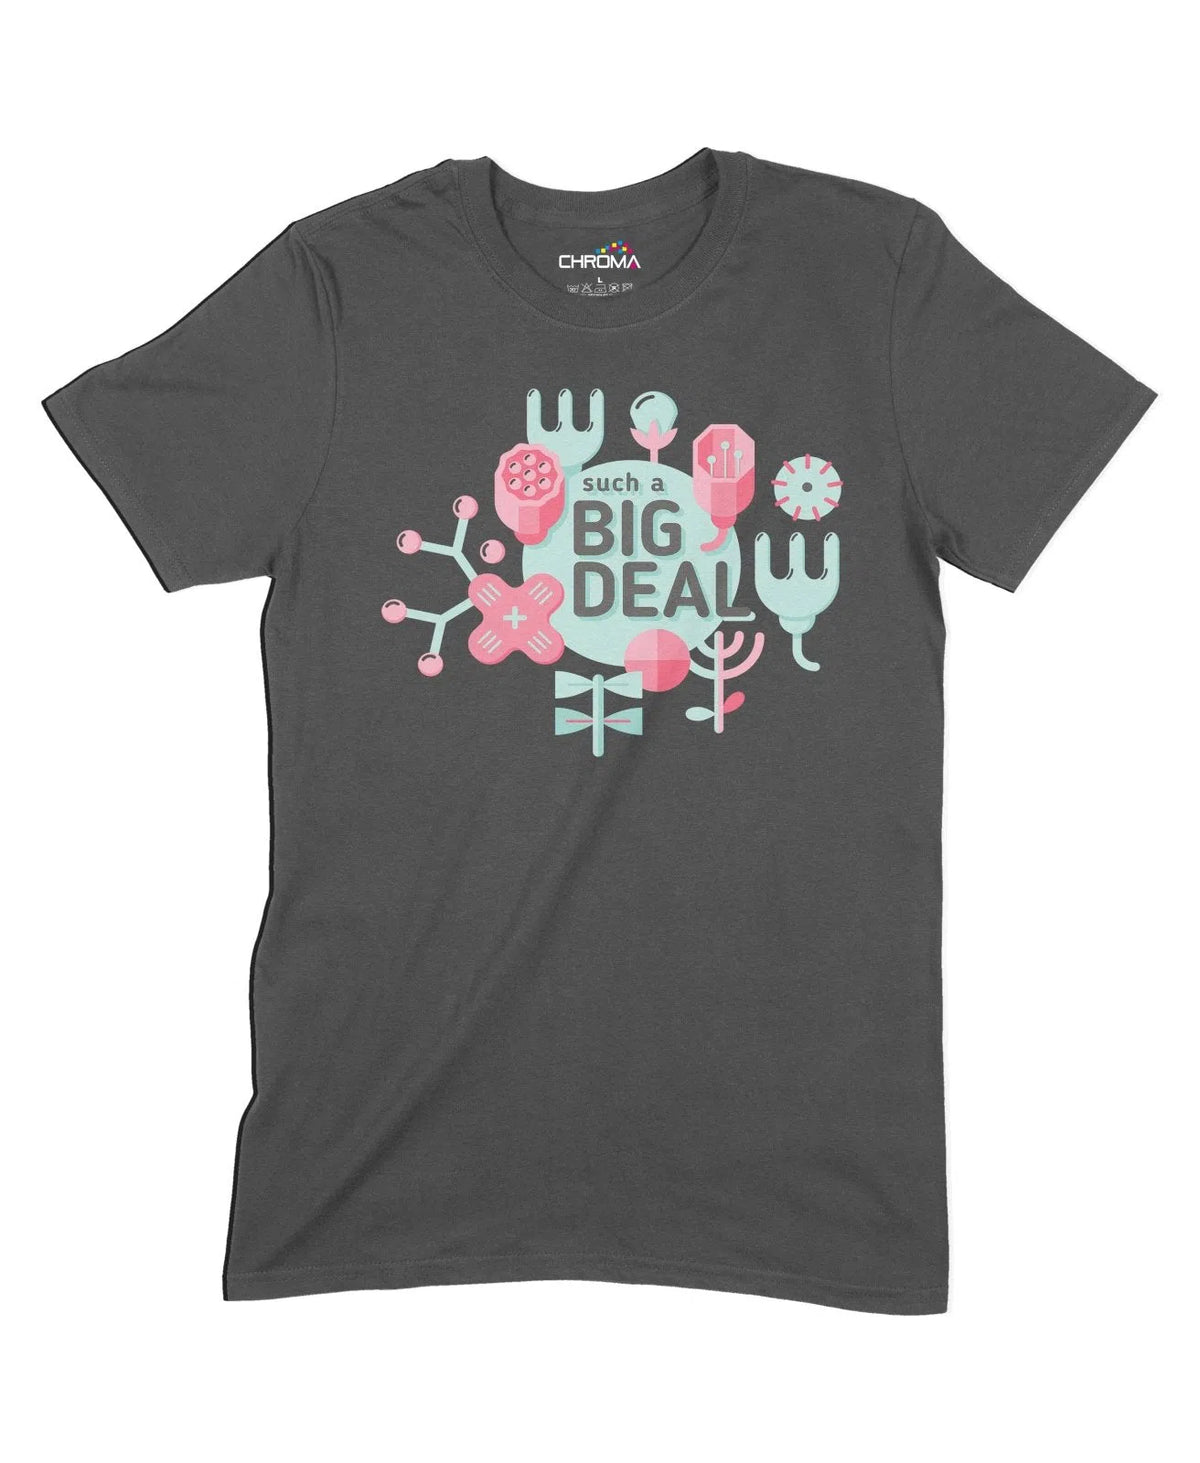 Such A Big Deal Unisex Adult T-Shirt Chroma Clothing